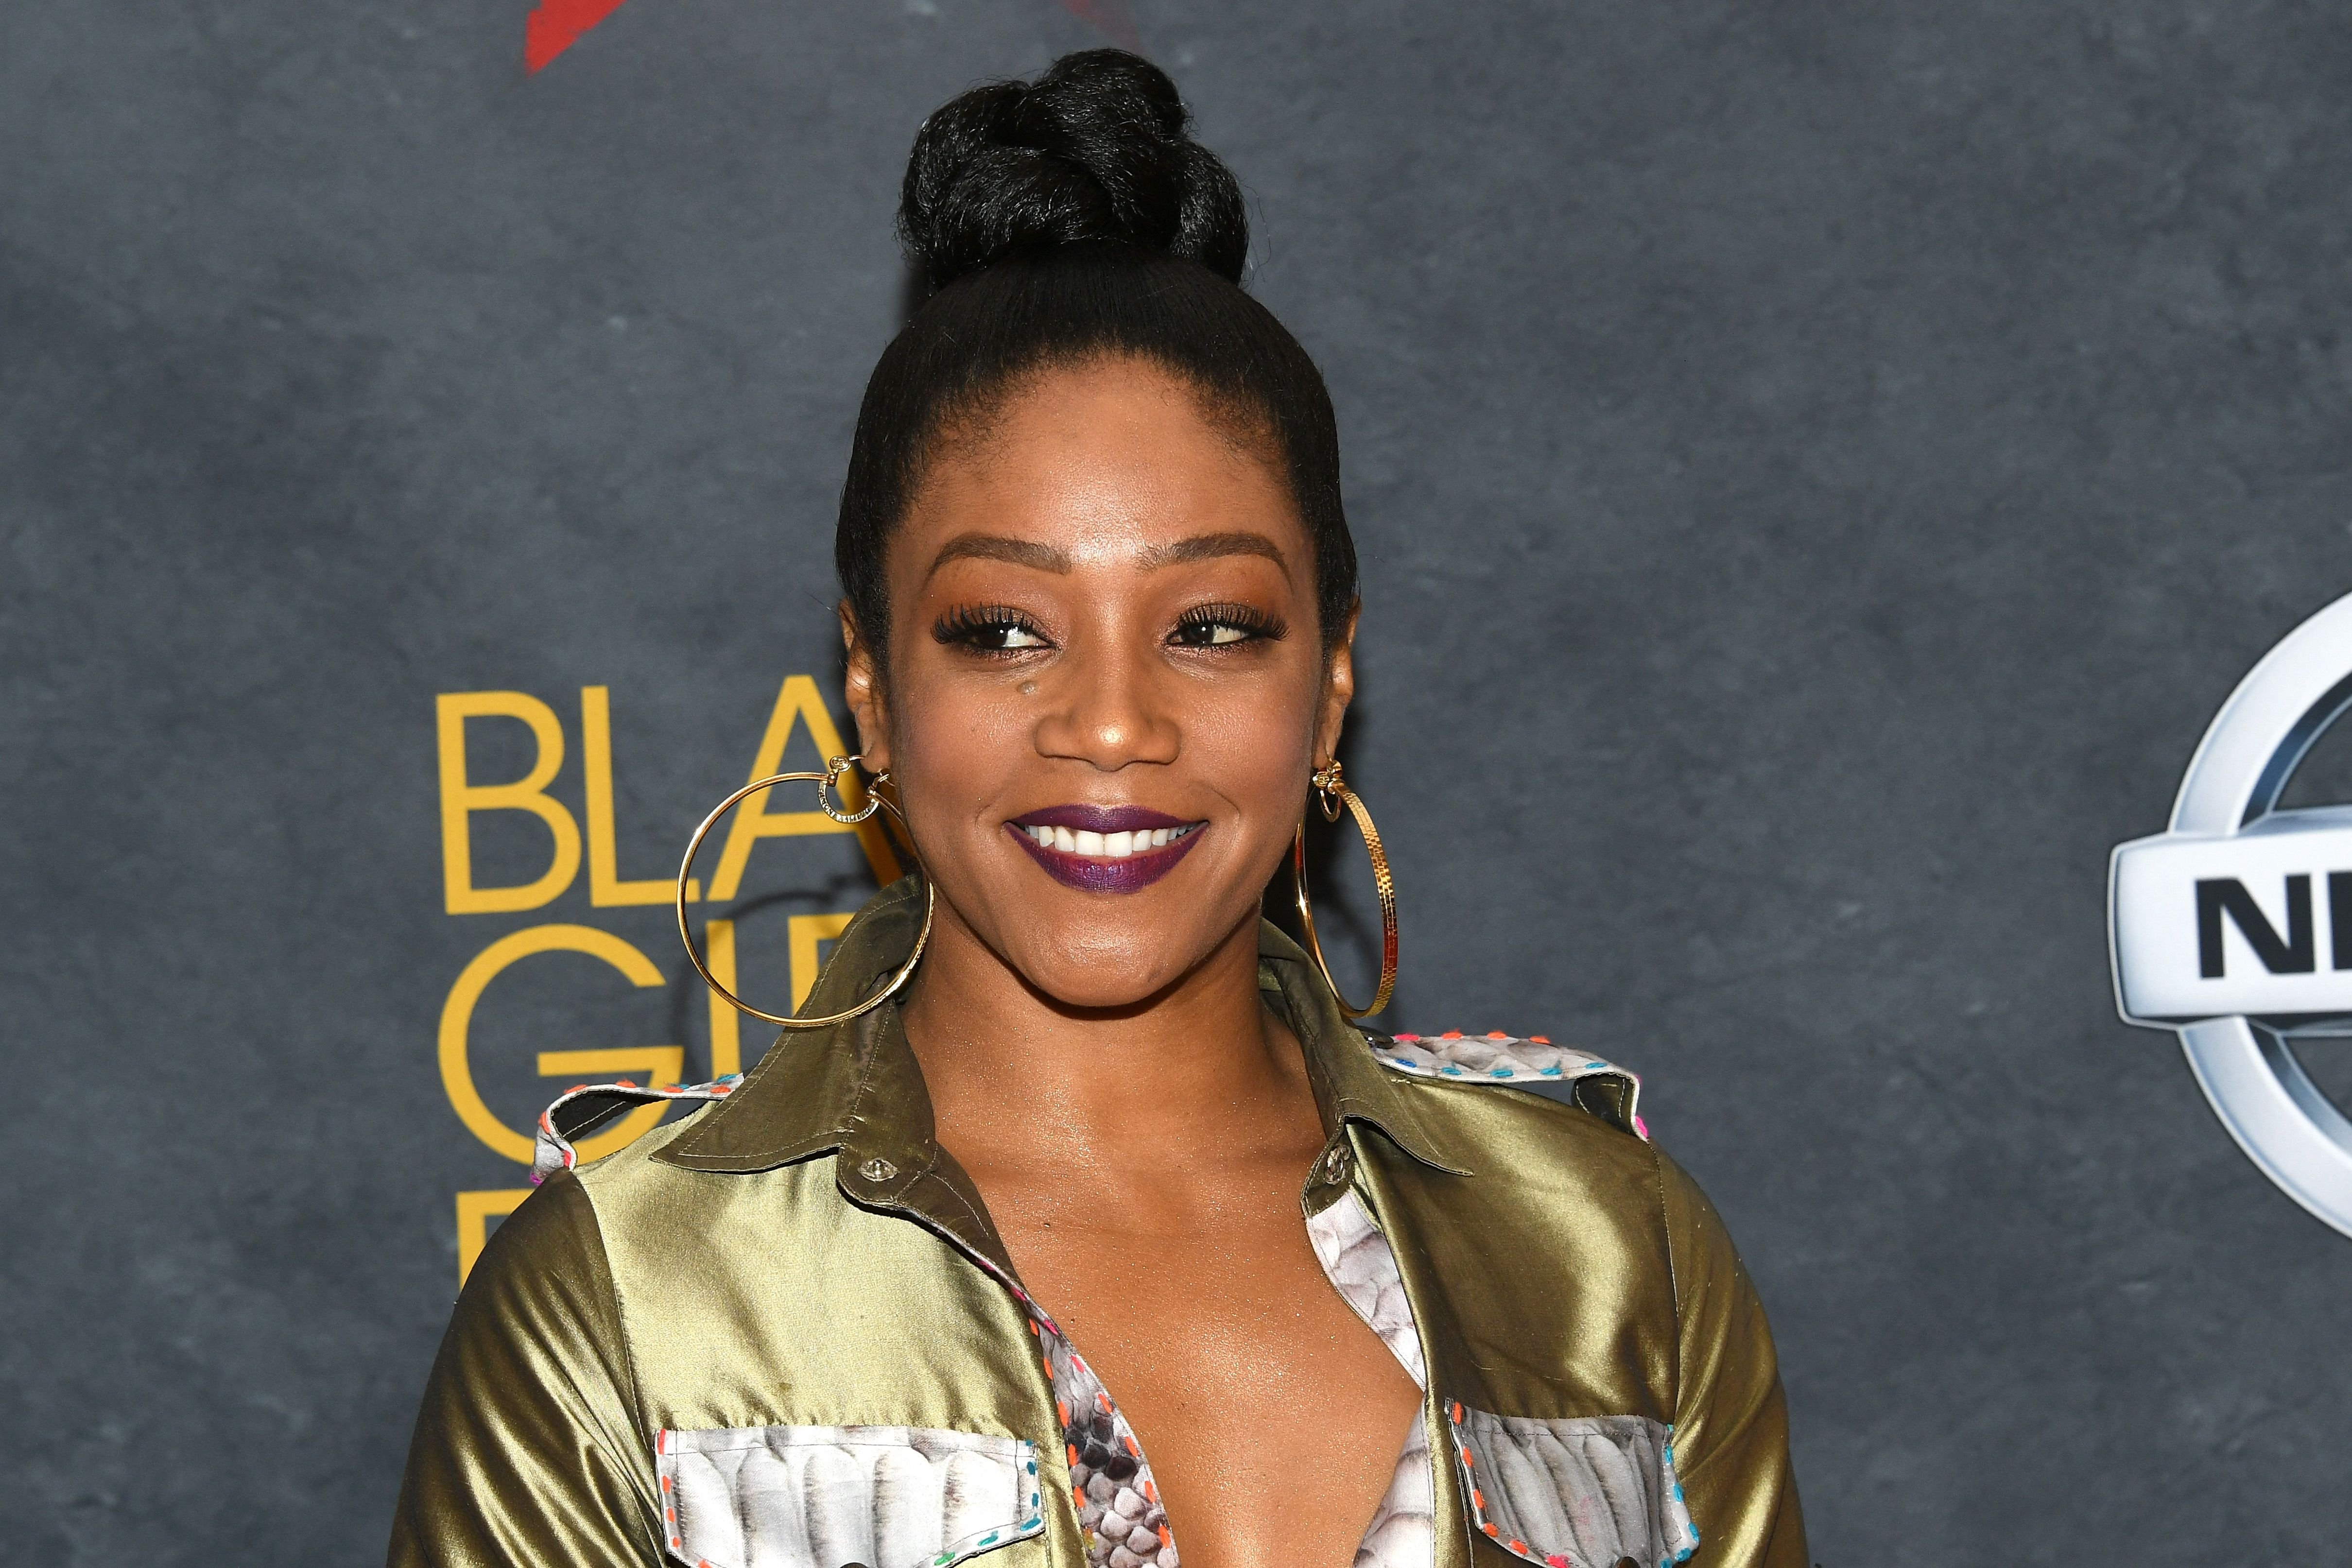 Tiffany Haddish during Black Girls Rock! 2017 at NJPAC on August 5, 2017 in Newark, New Jersey. | Source: Getty Images